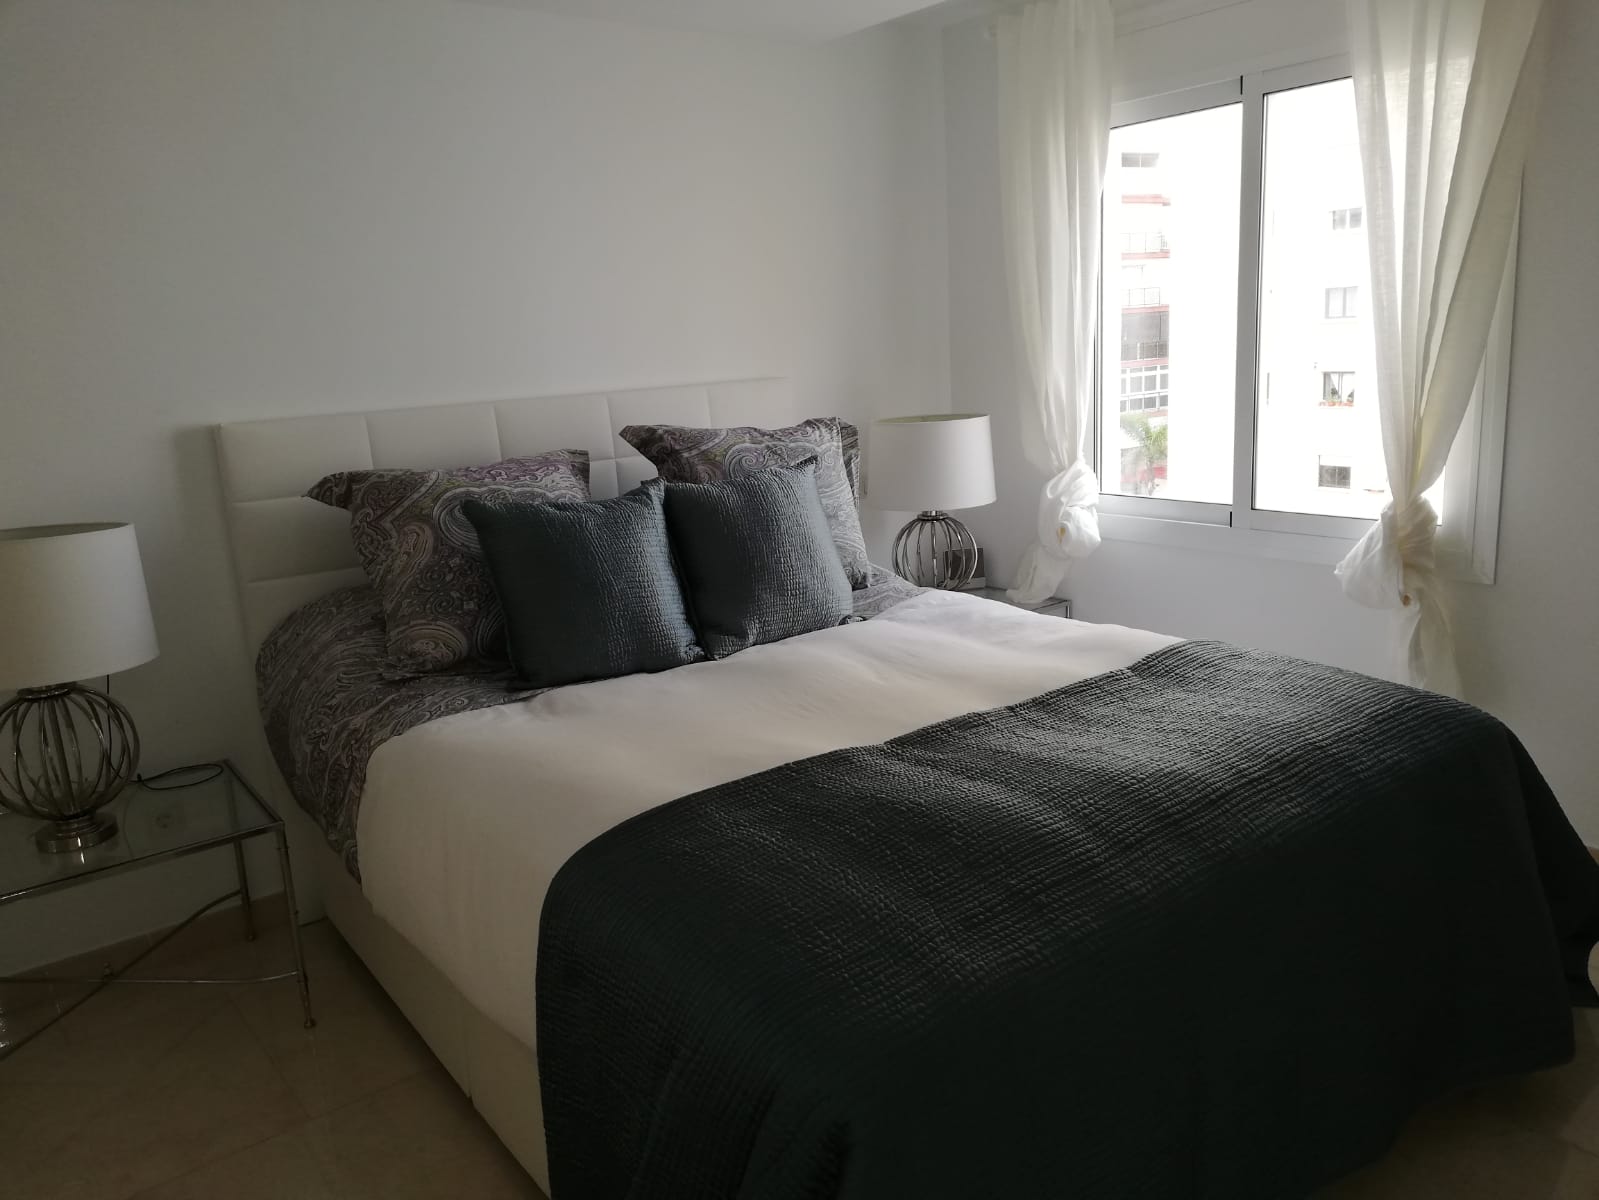 2 bedroom apartment for rent in Estepona near the beach - thumb - mibgroup.es